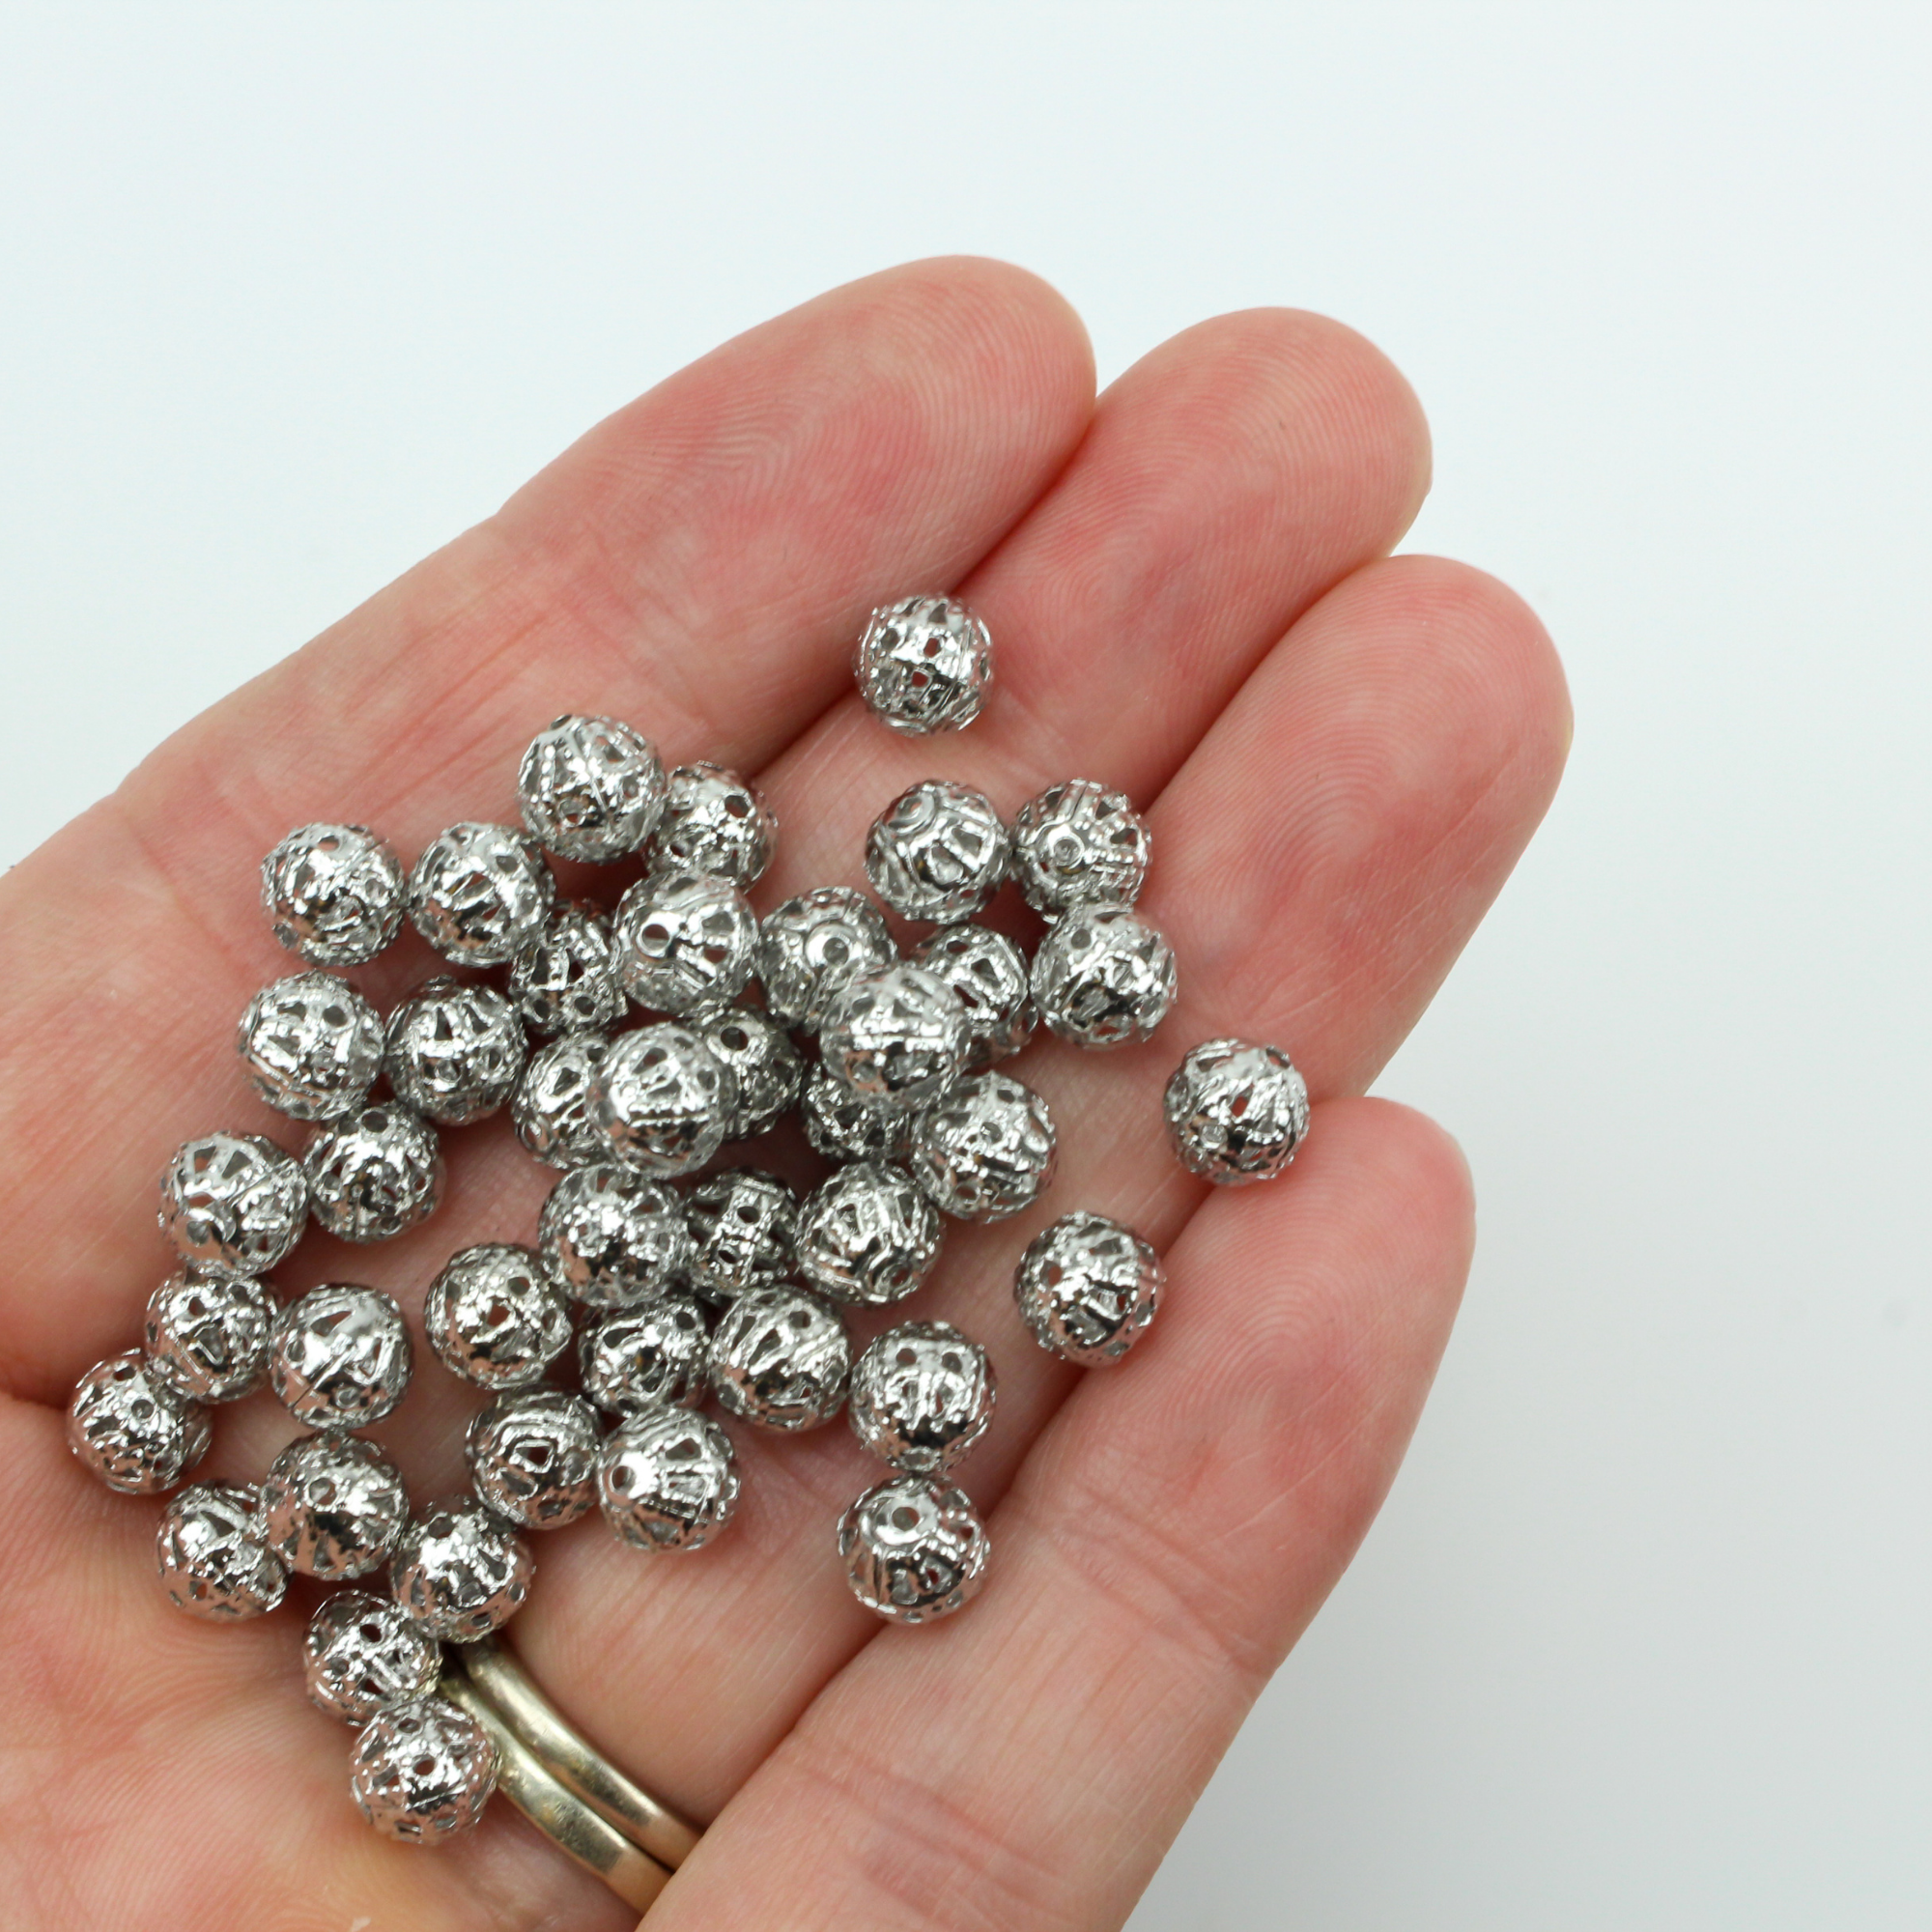 6mm lightweight metal beads are hollow with a cutout filigree design and an antiqued silver color